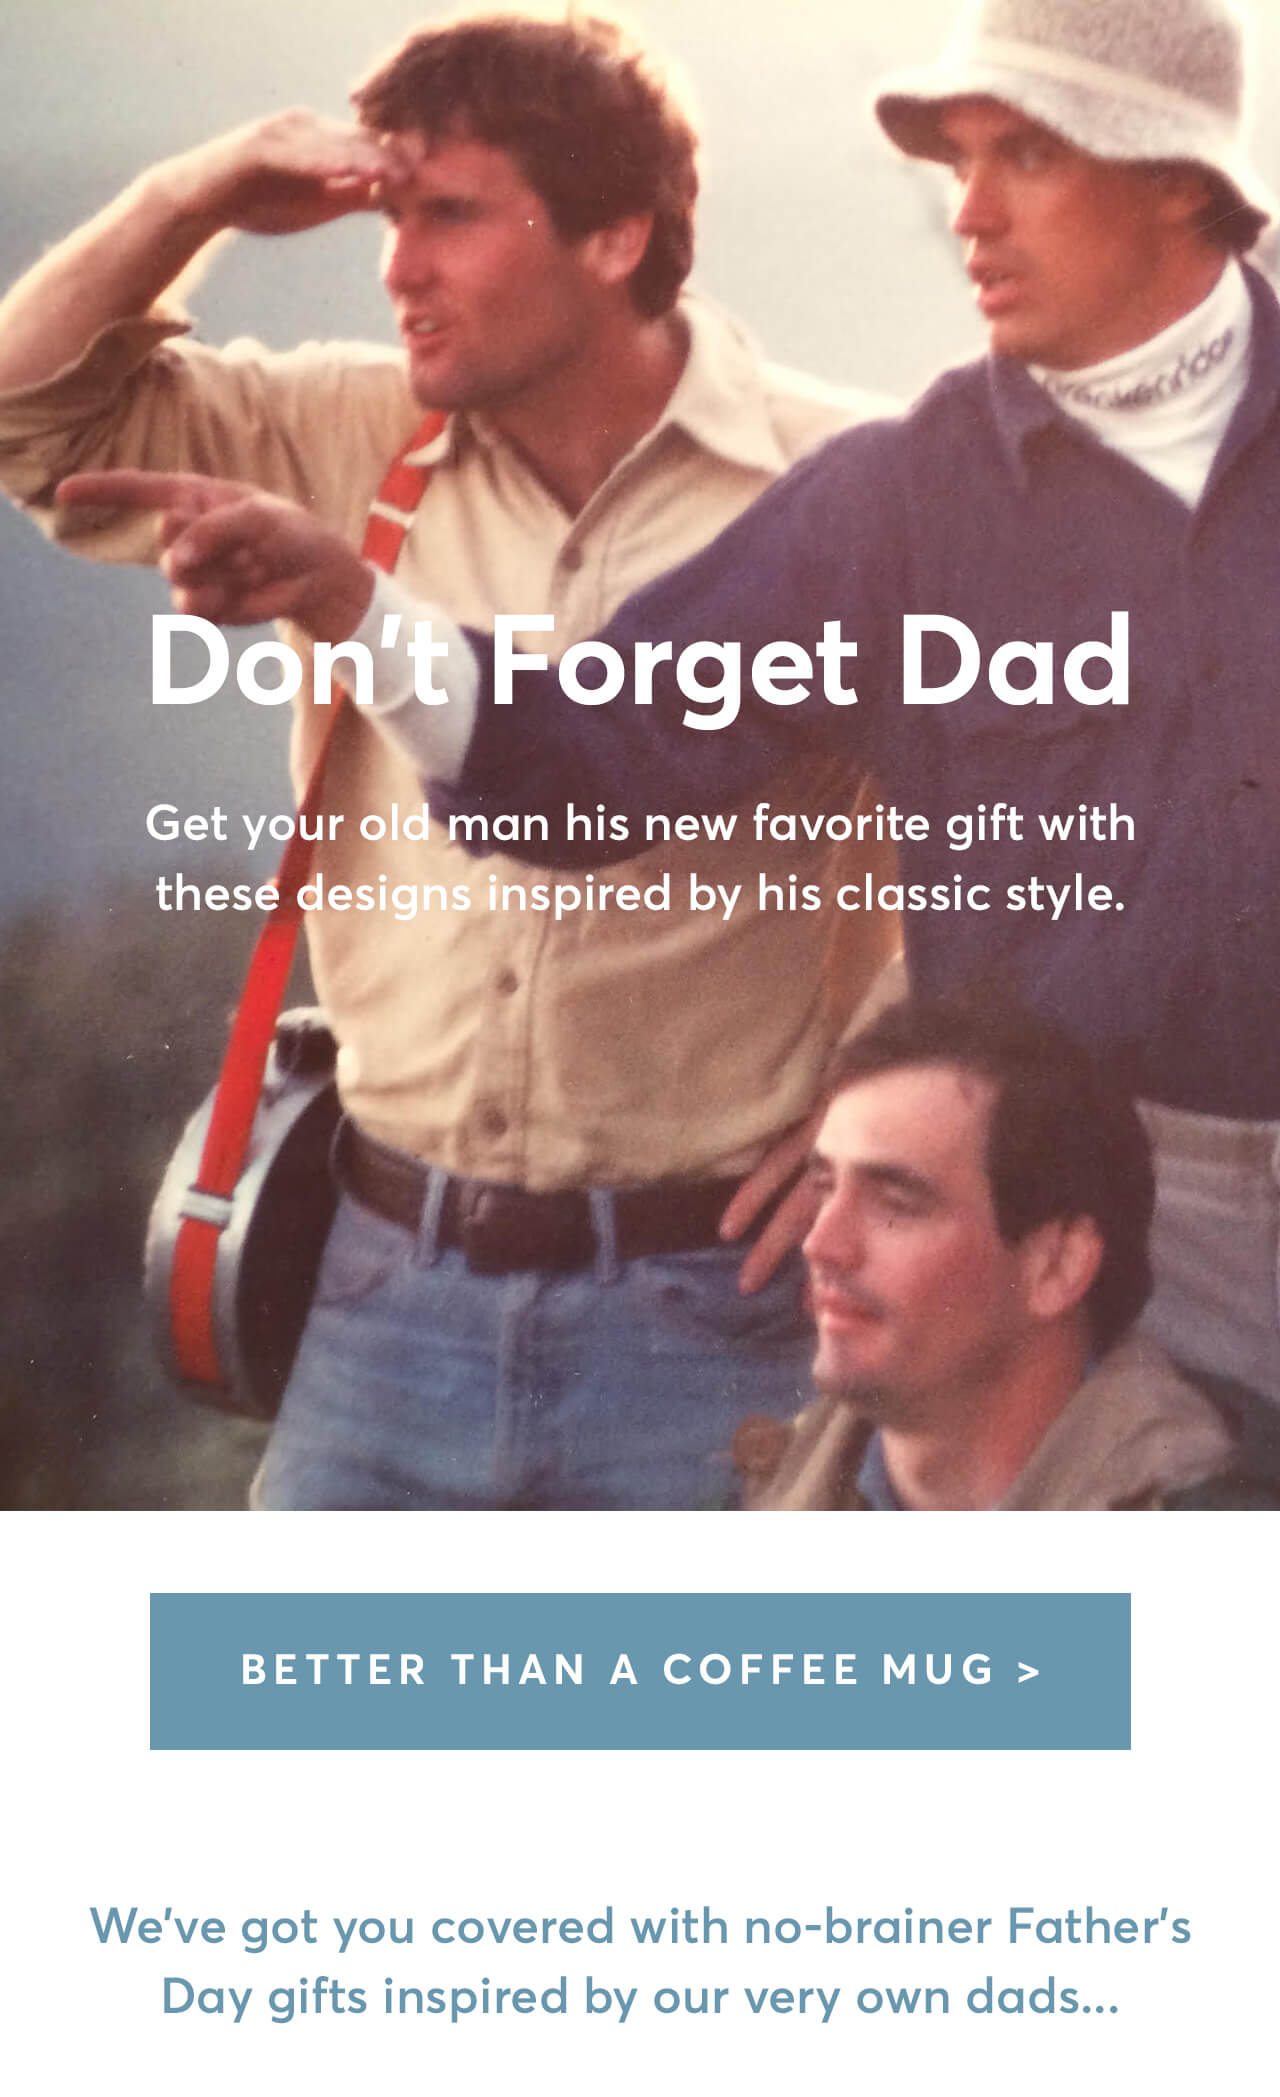 Father’s Day is next Sunday.